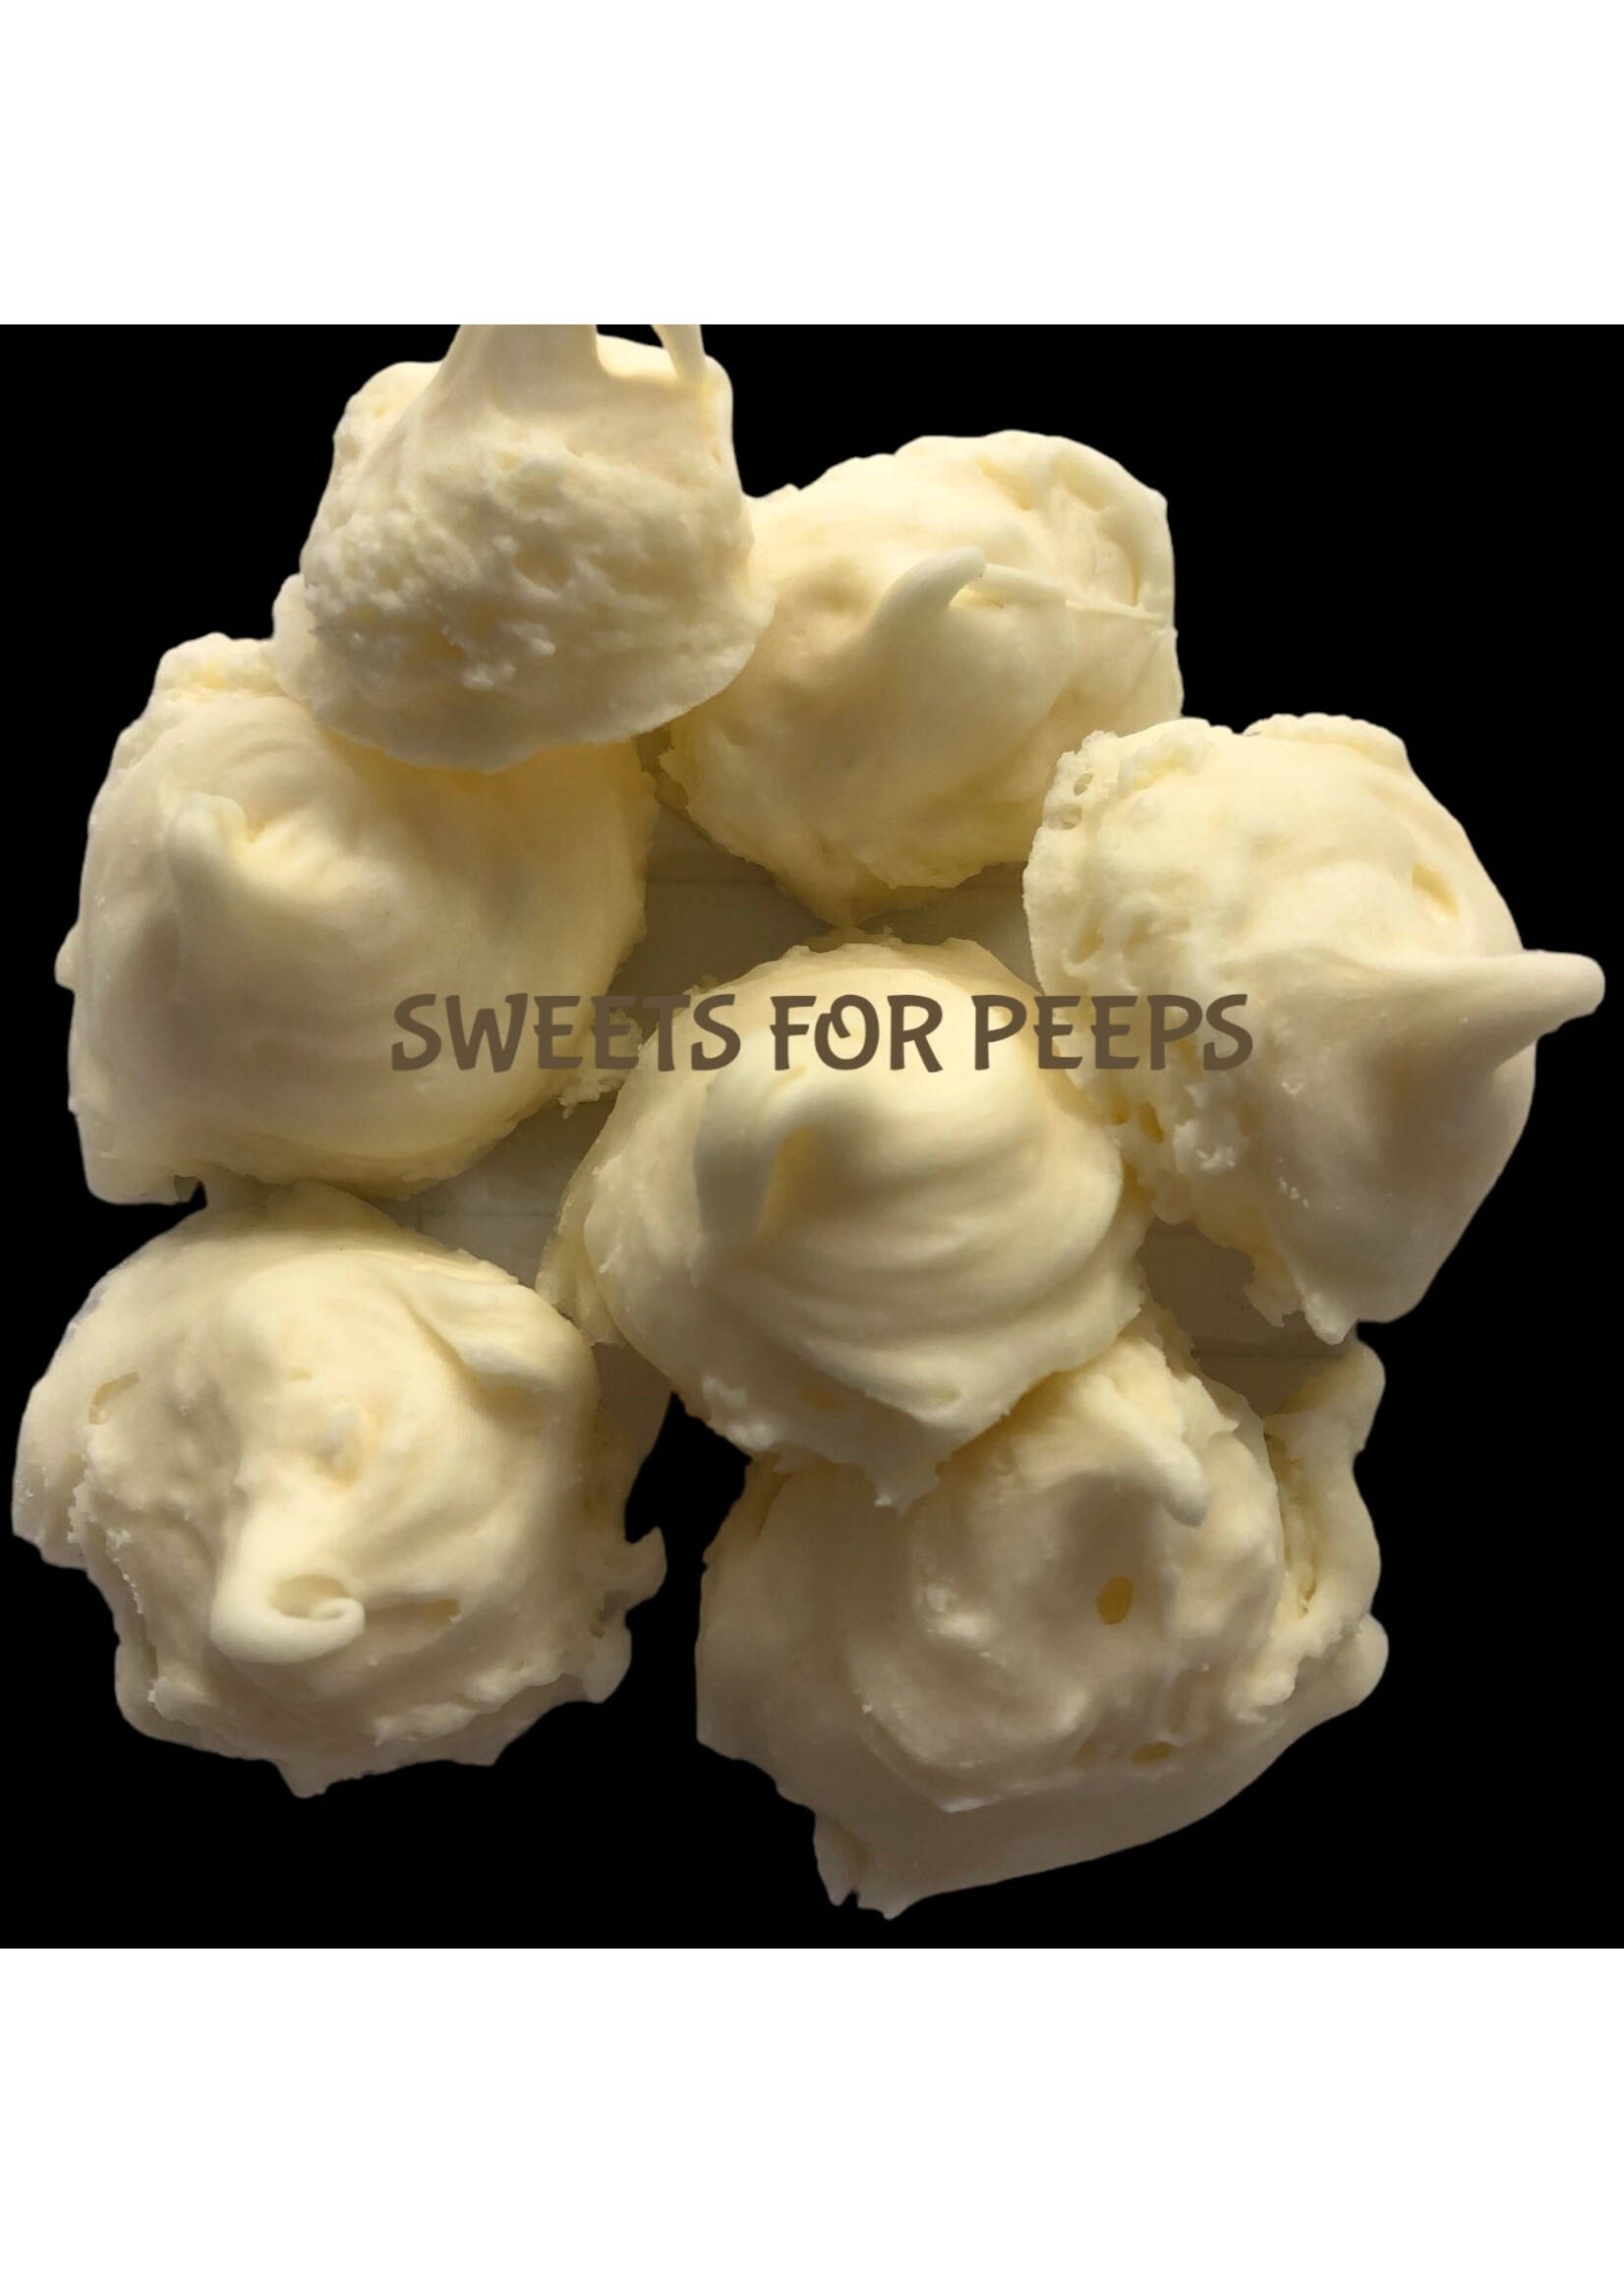 CND Freeze Dried Products Sweets for Peeps  Freeze Dried Cream Cheese Mounds